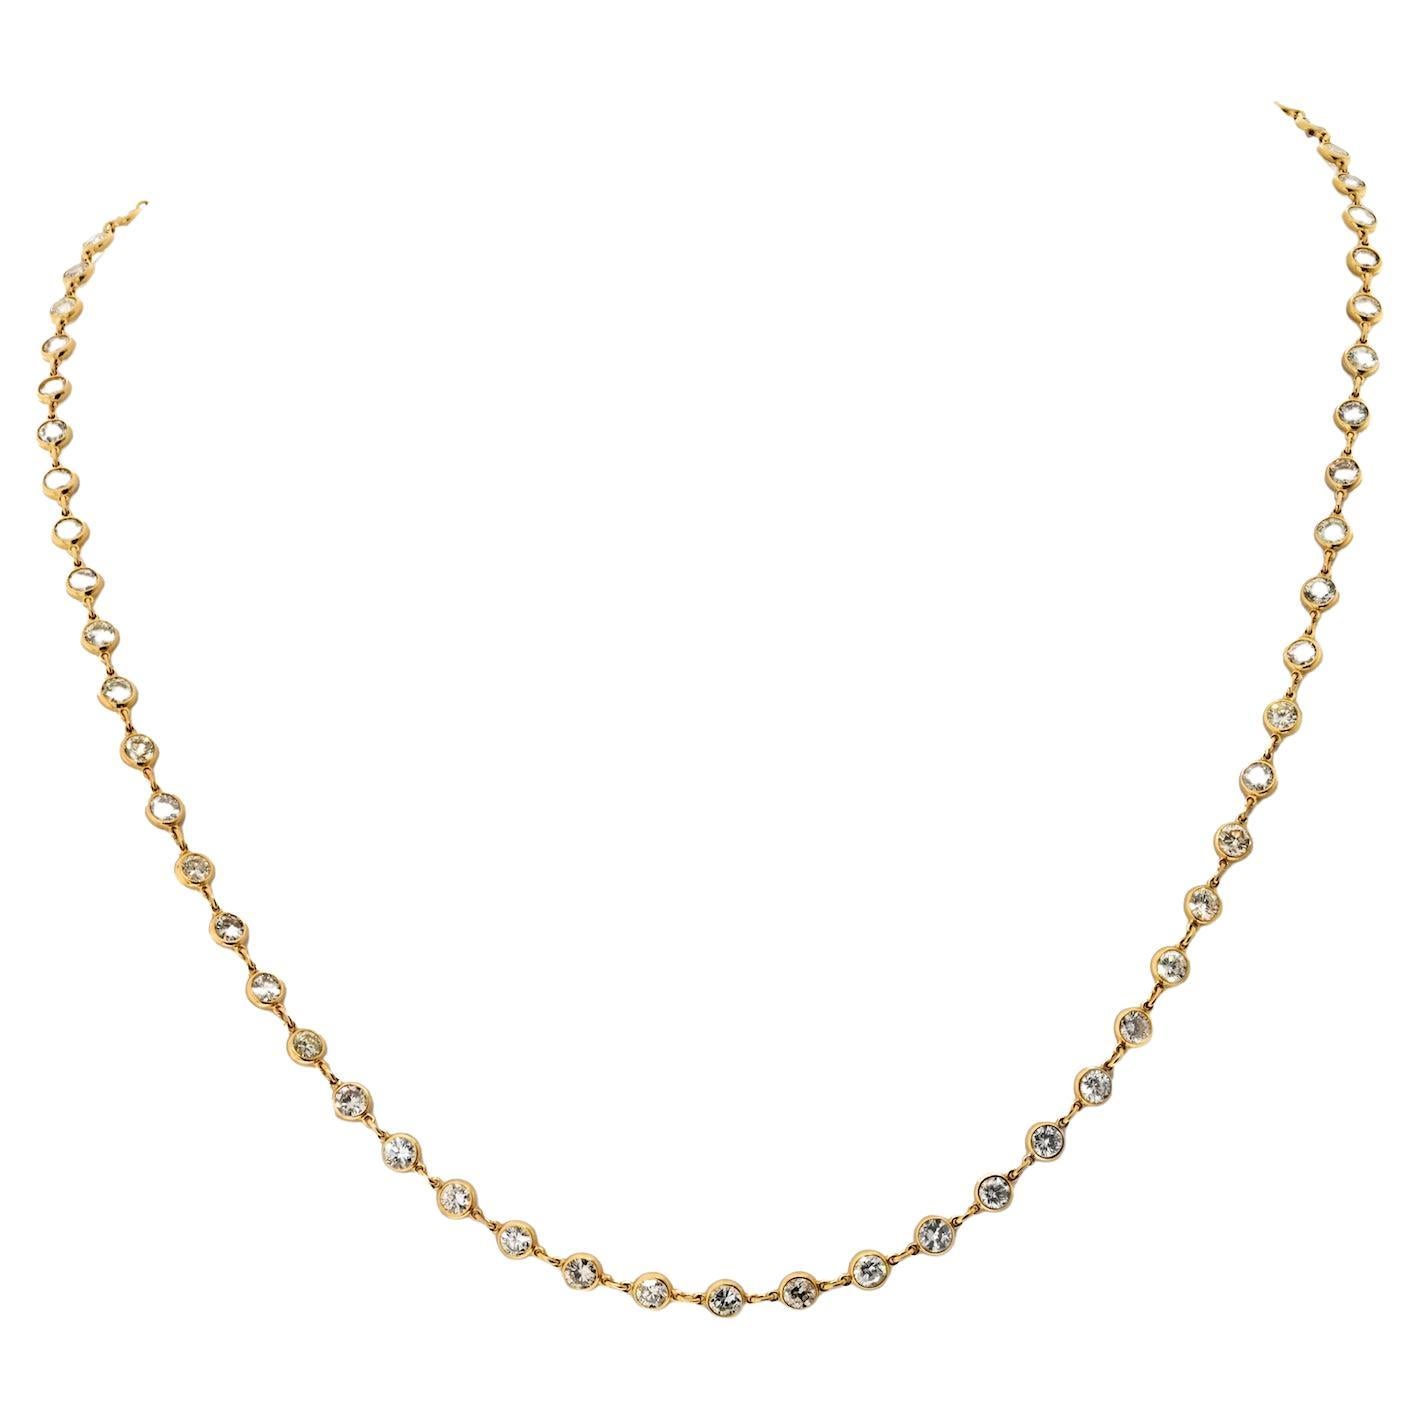 18K Yellow Gold 11.68cttw Diamond By The Yard 16 Inch Chain Necklace